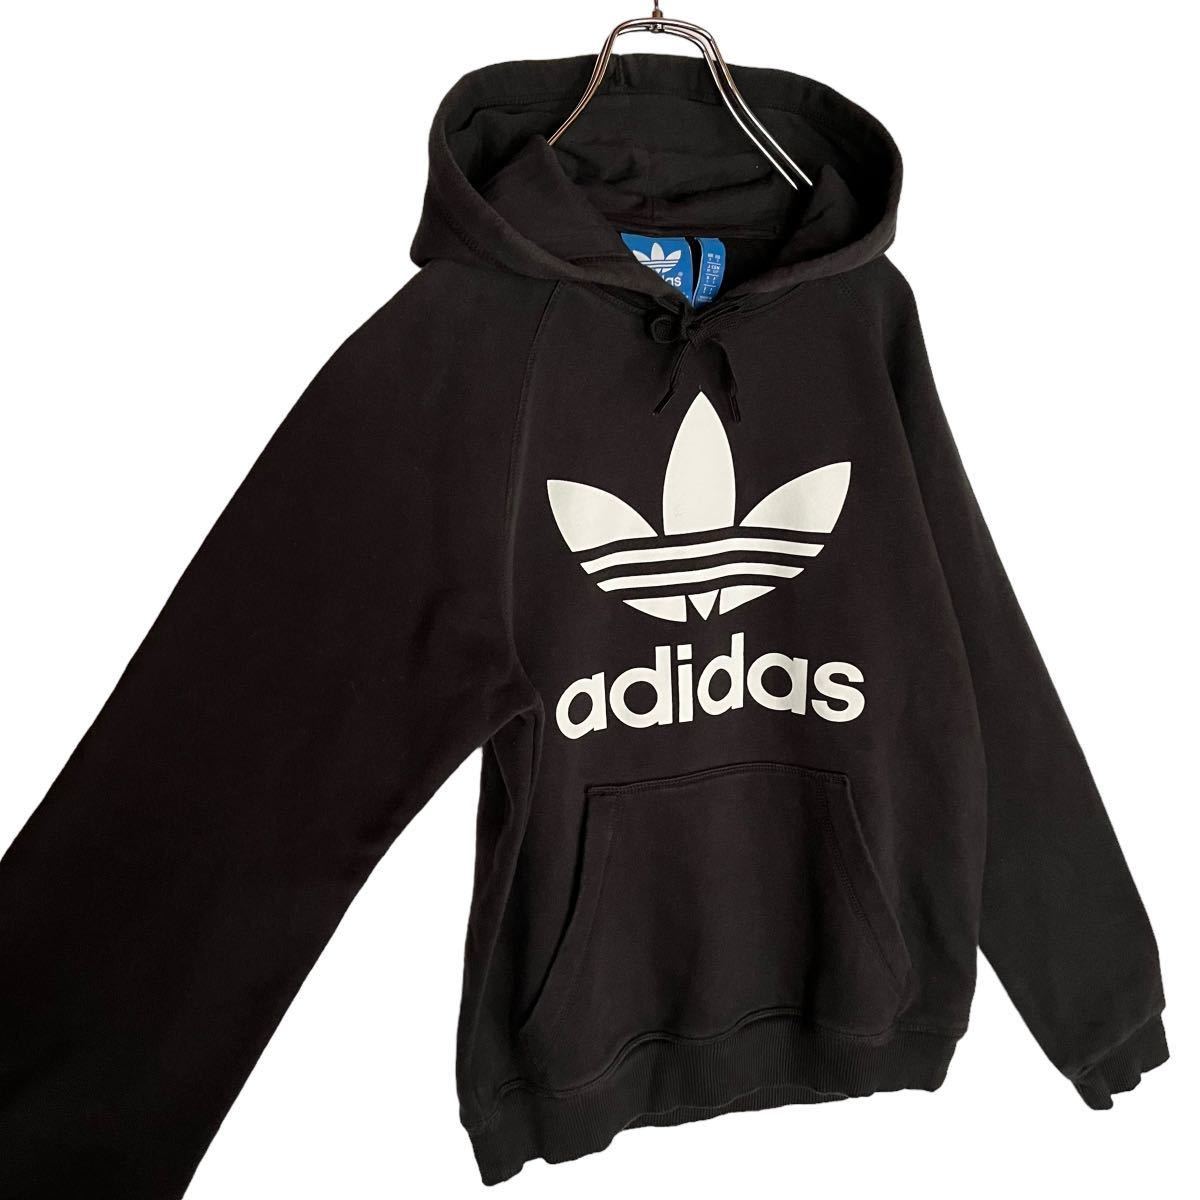 adidas Adidas sweat Parker pull over Parker big Logo black reverse side nappy lady's M size [AY1300]